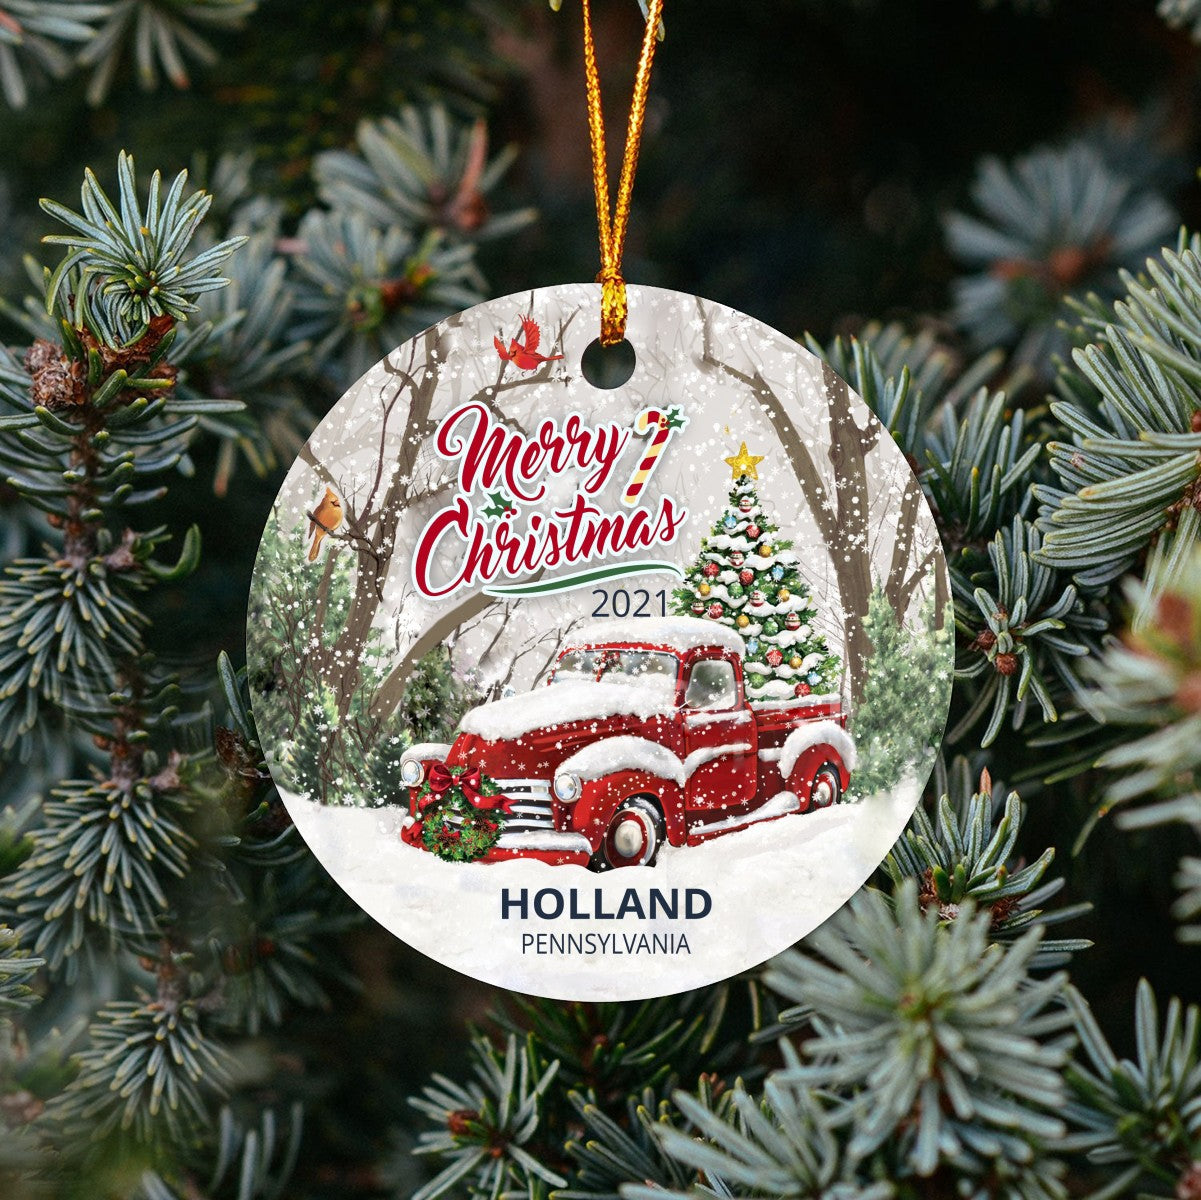 Christmas Tree Ornaments Holland - Ornament With Name City, State Holland Pennsylvania PA Ornament - Red Truck Xmas Ornaments 3'' Plastic Gift For Family, Friend And Housewarming